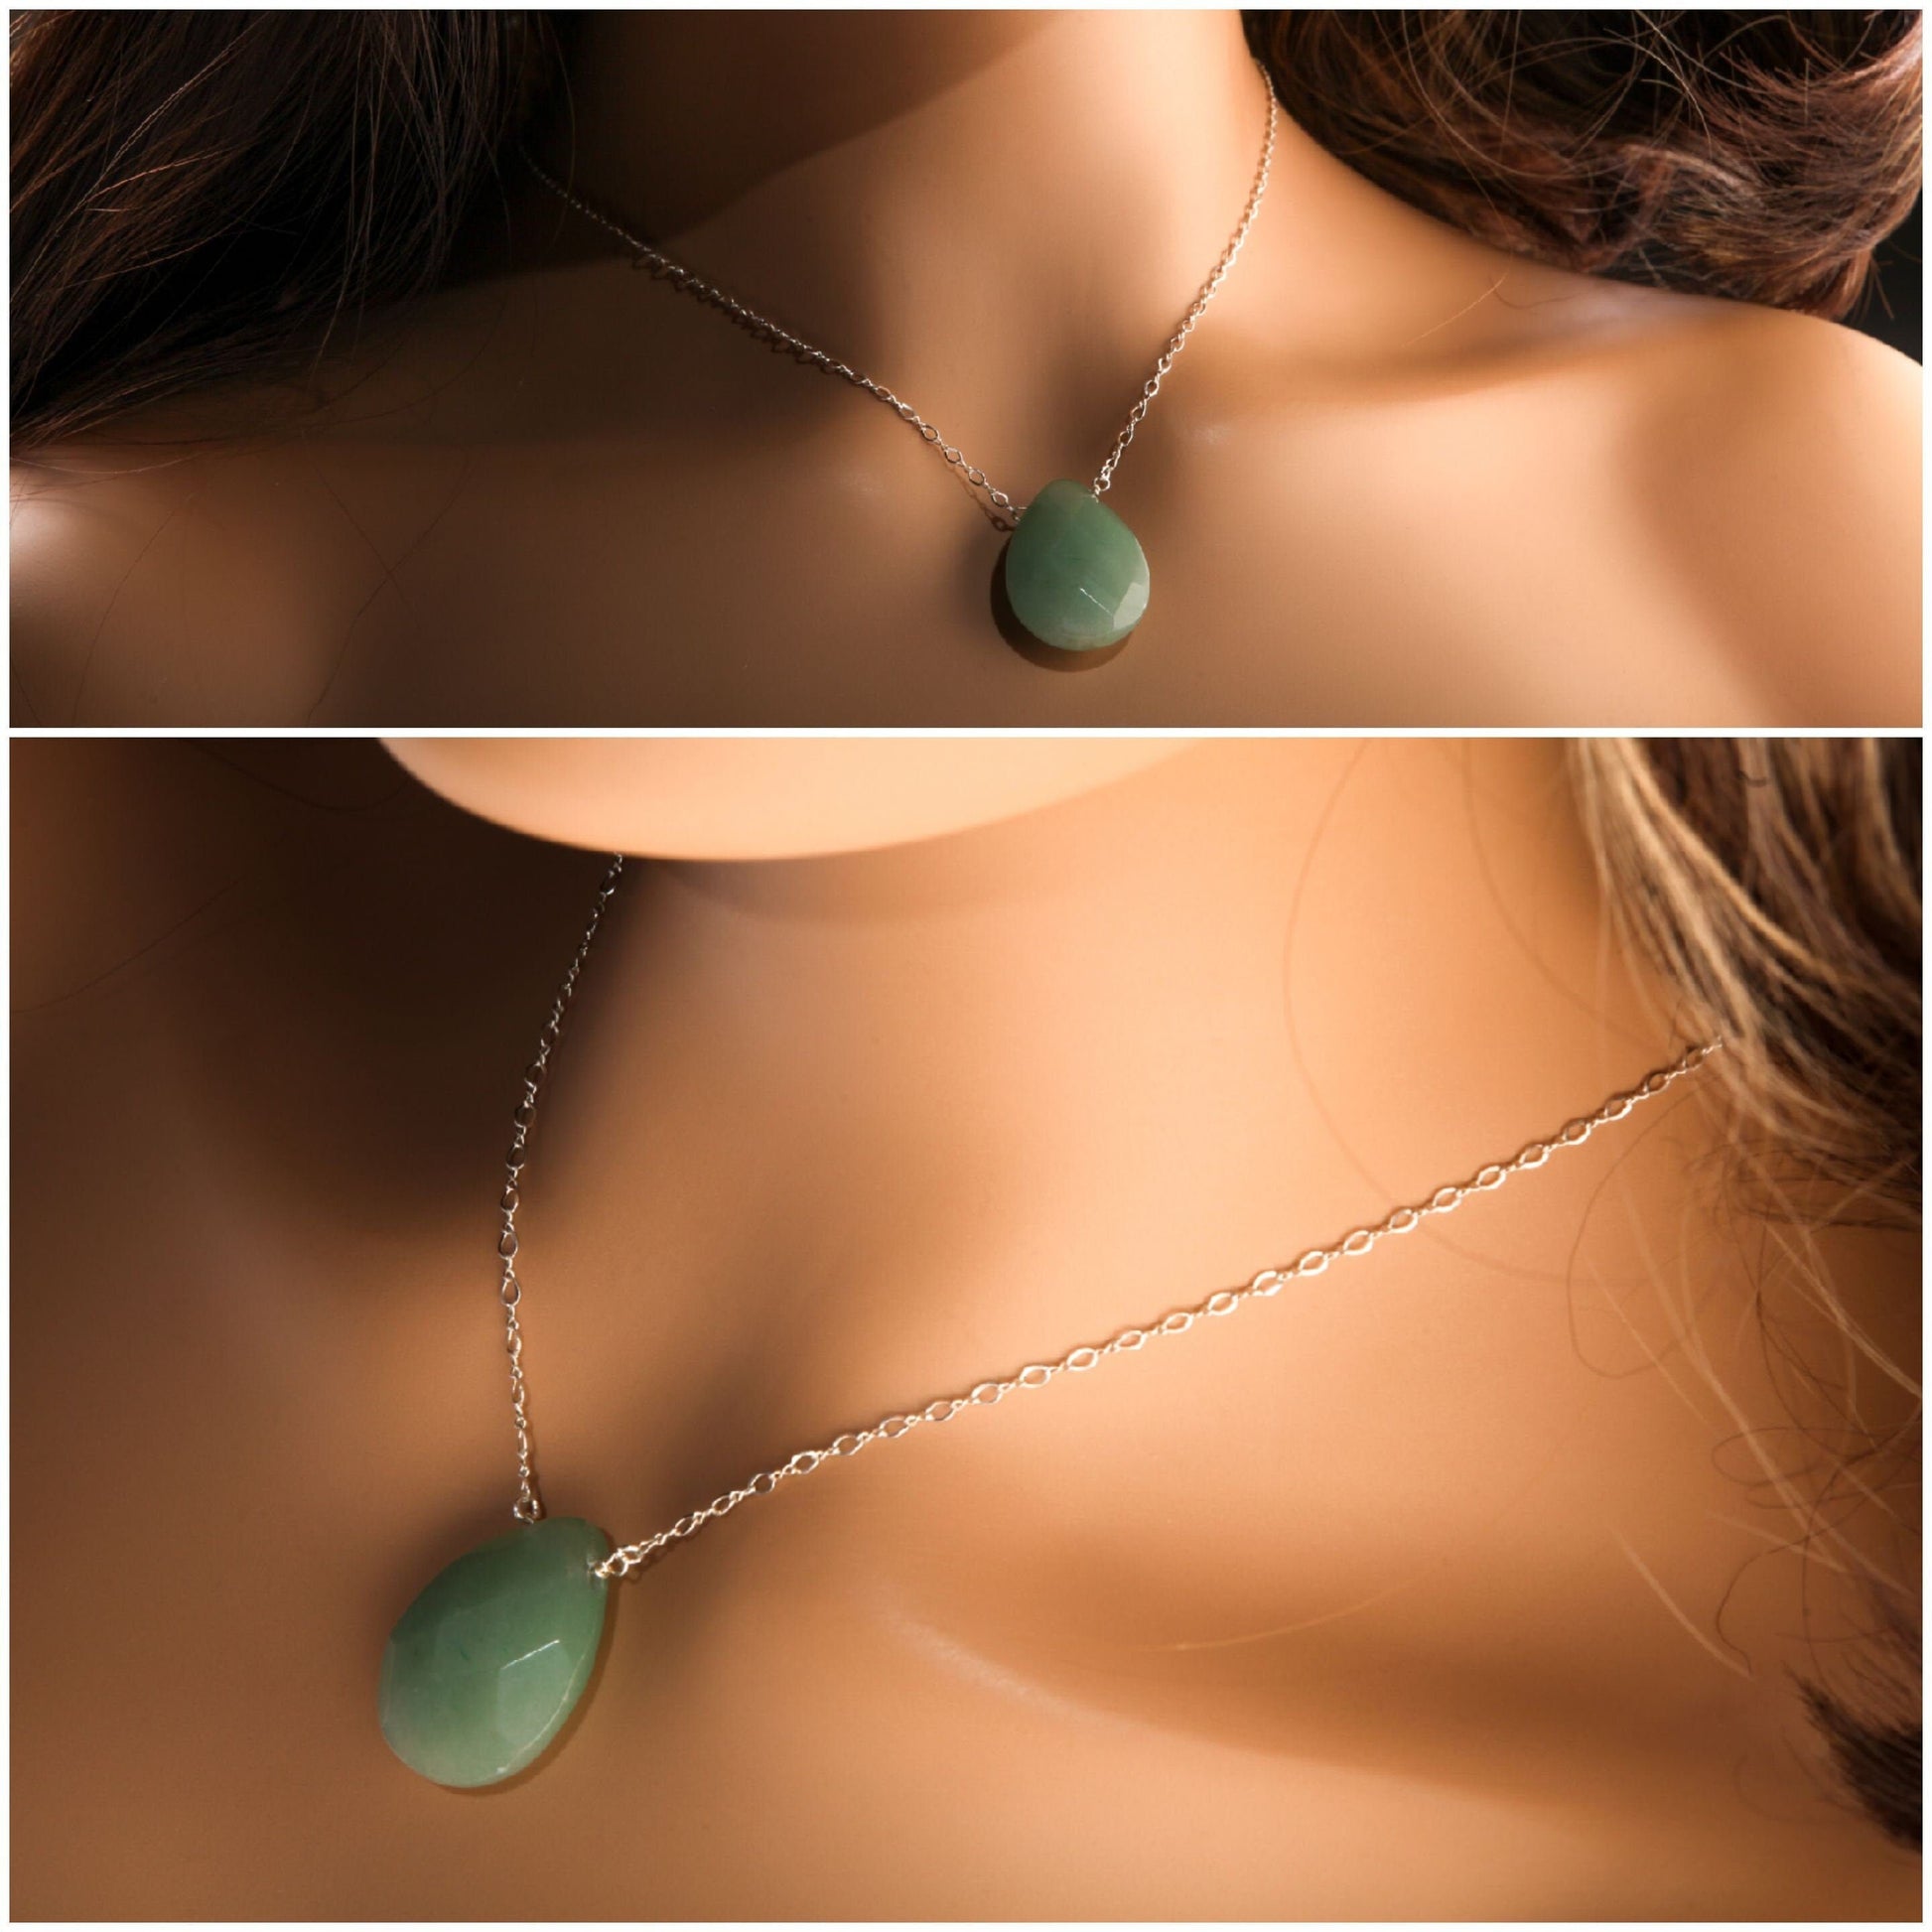 Natural Gemstones Faceted Pear Drop 22x30mm, Aqua Chalcedony,Rose Quartz, Chalcedony, Nephrite Jade, Aventurine in 925 Sterling Silver Chain